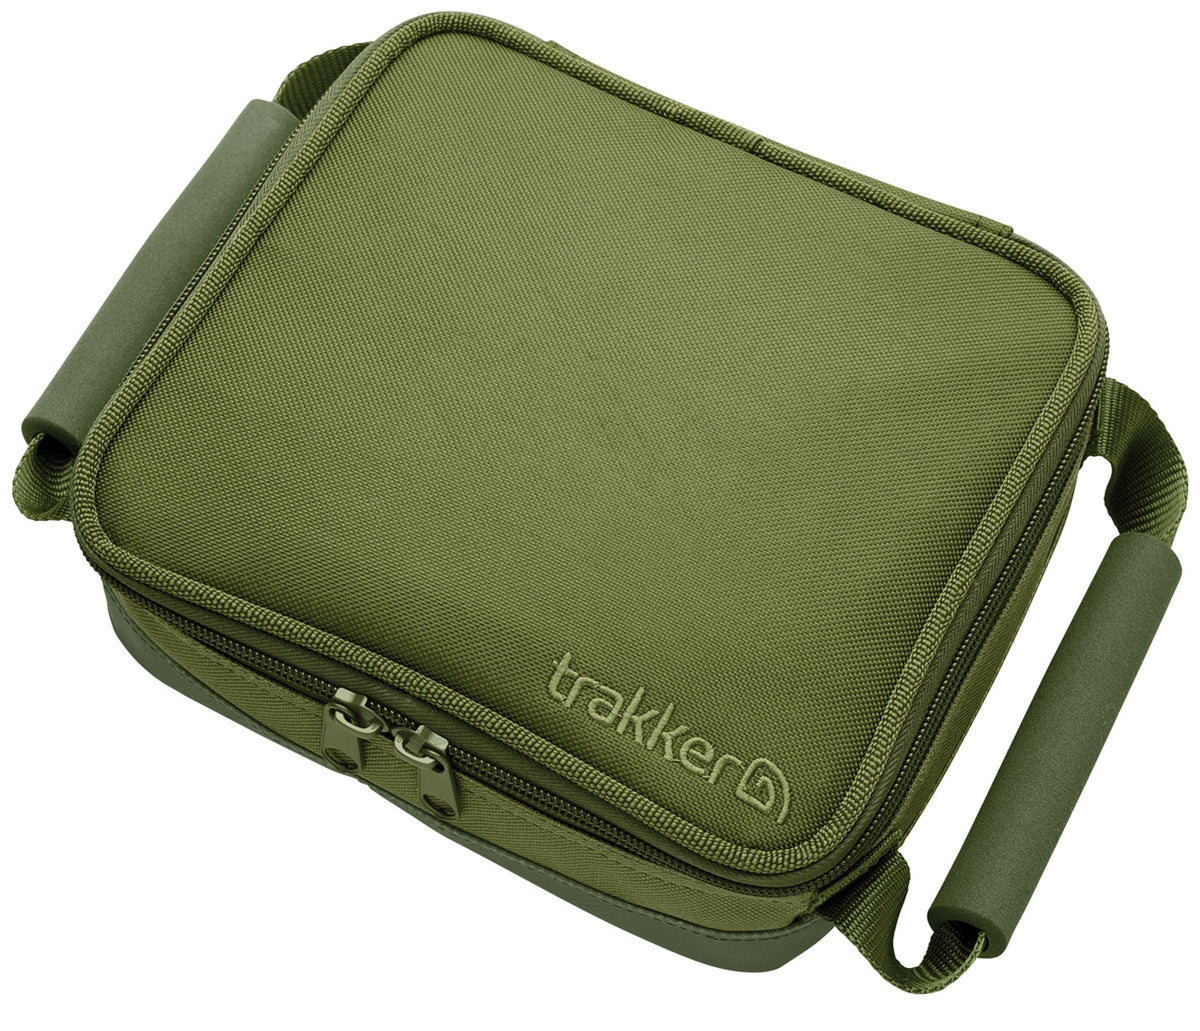 Trakker NXG Modular Lead Pouch - Complete with Modular Pouches.